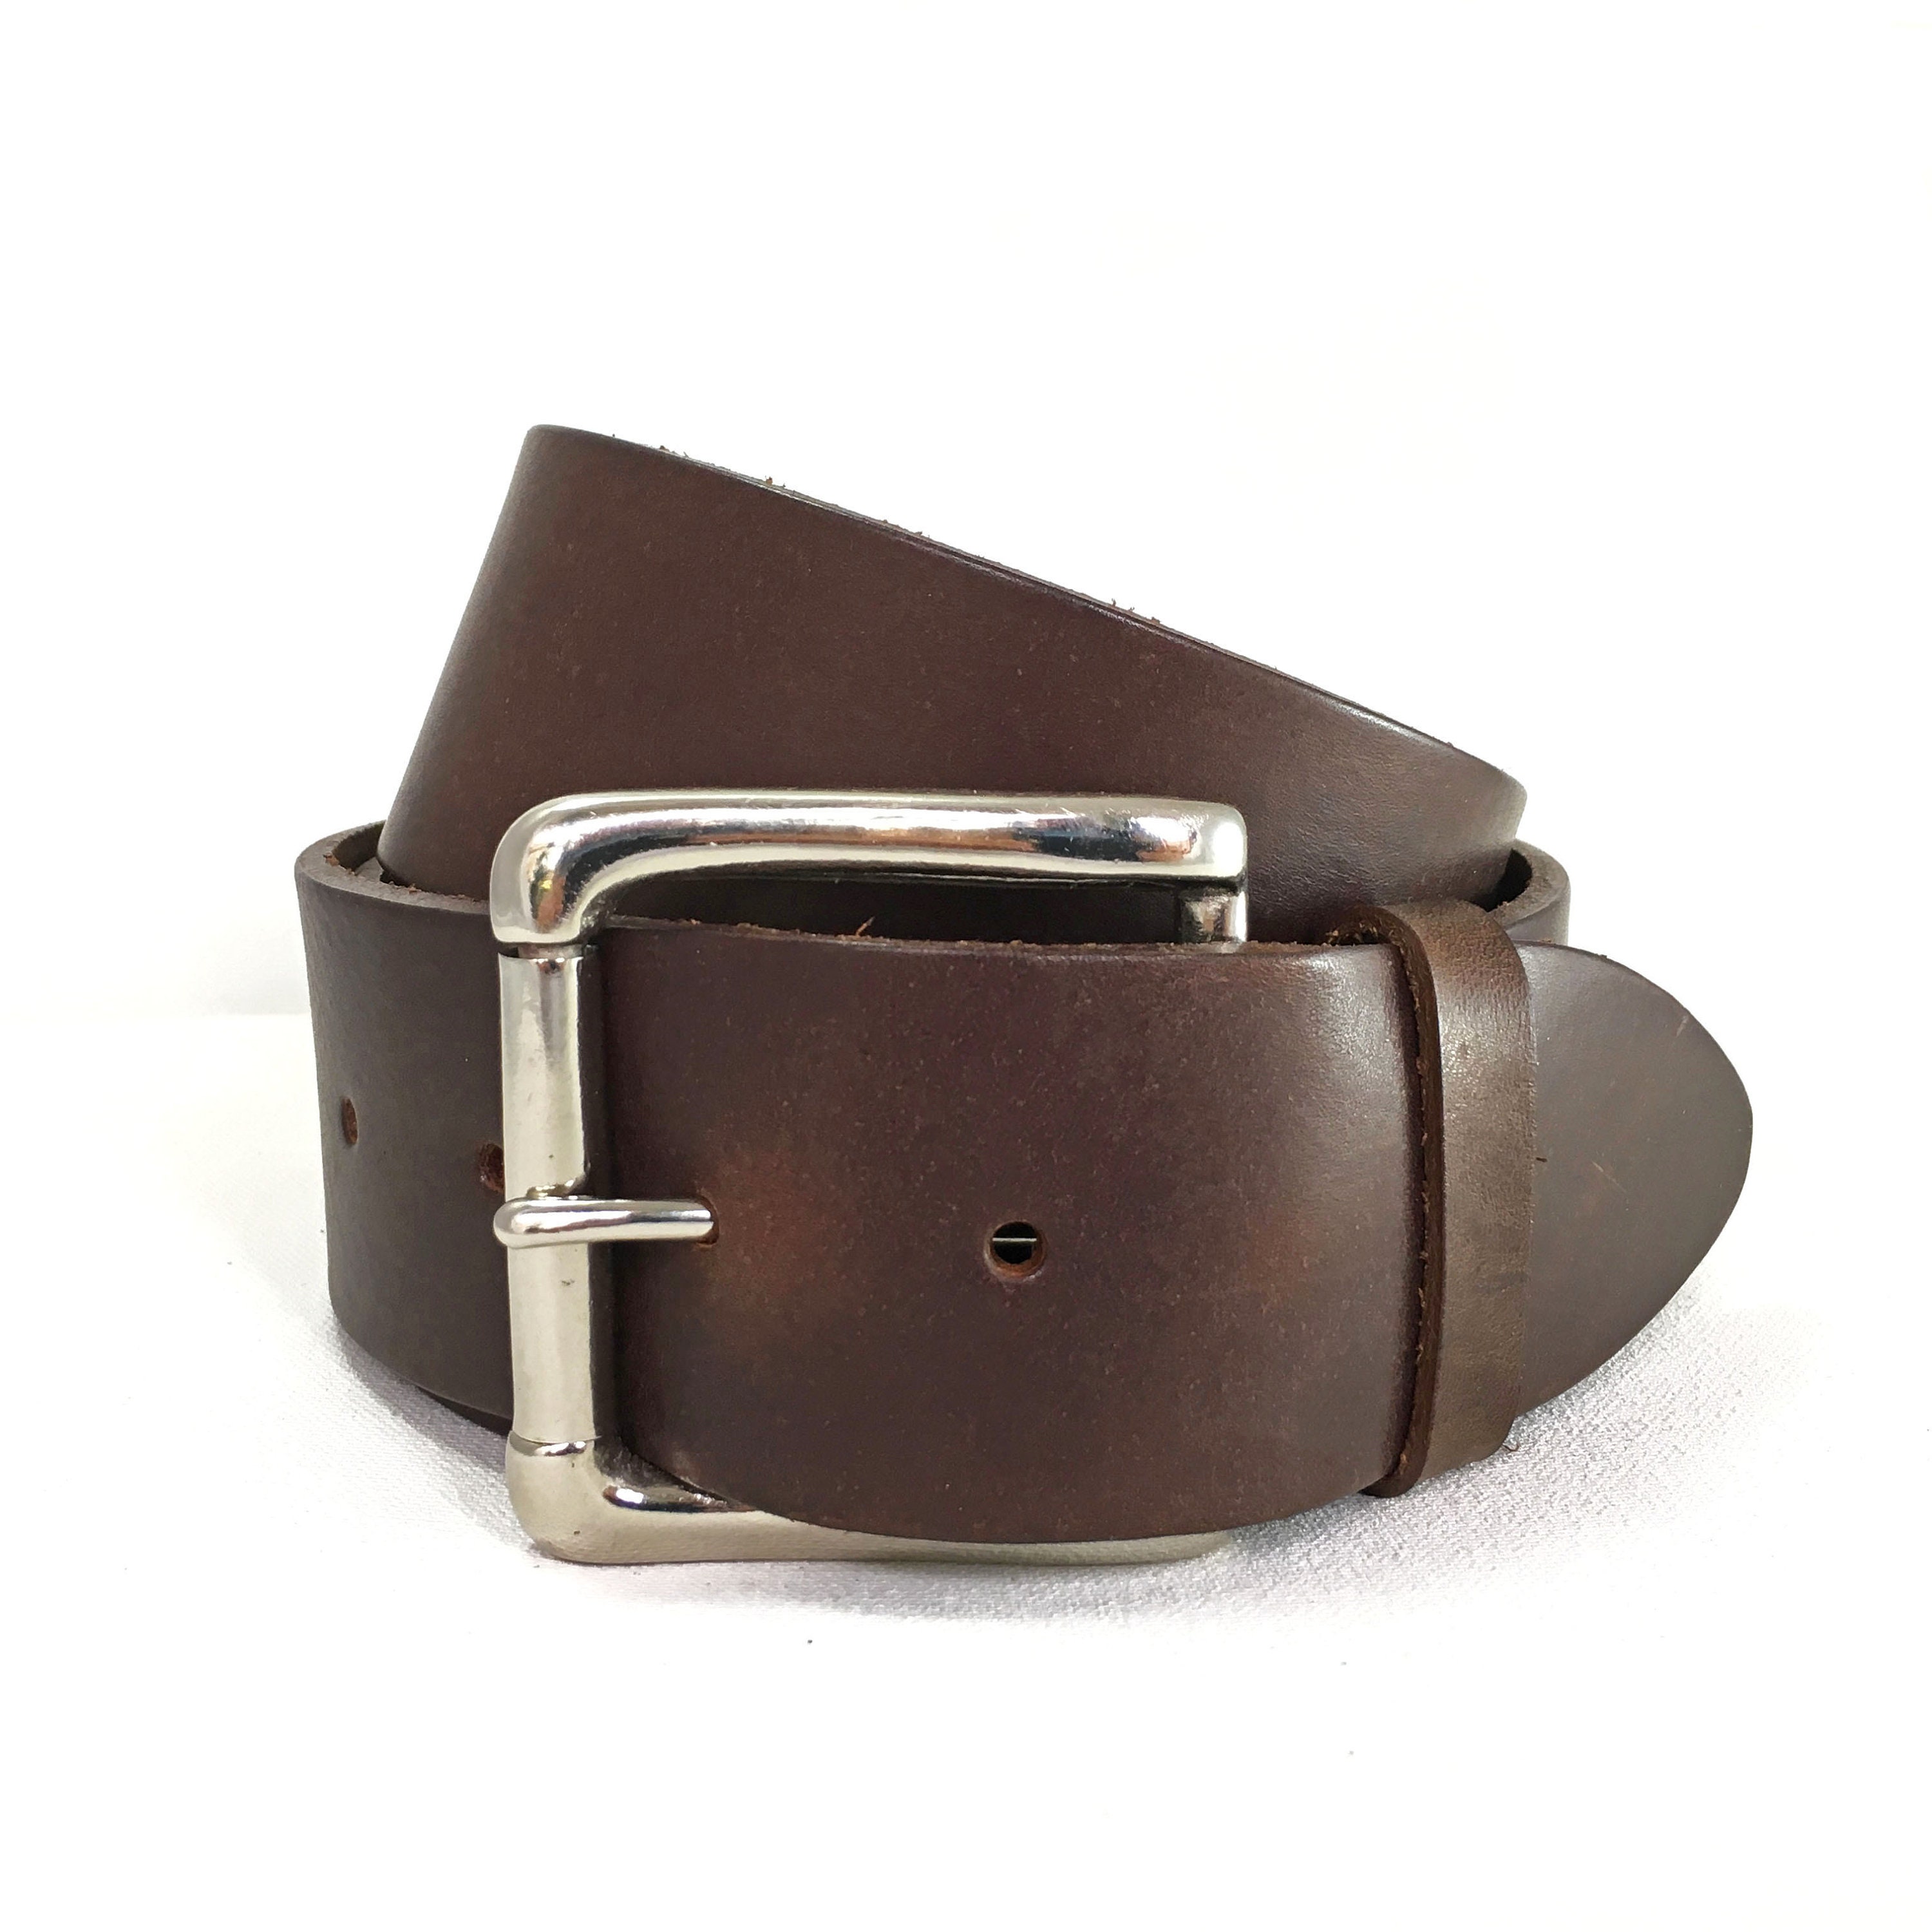 Thick Genuine Leather Handmade Leather BeltMen's Black Brown Vintage Casual